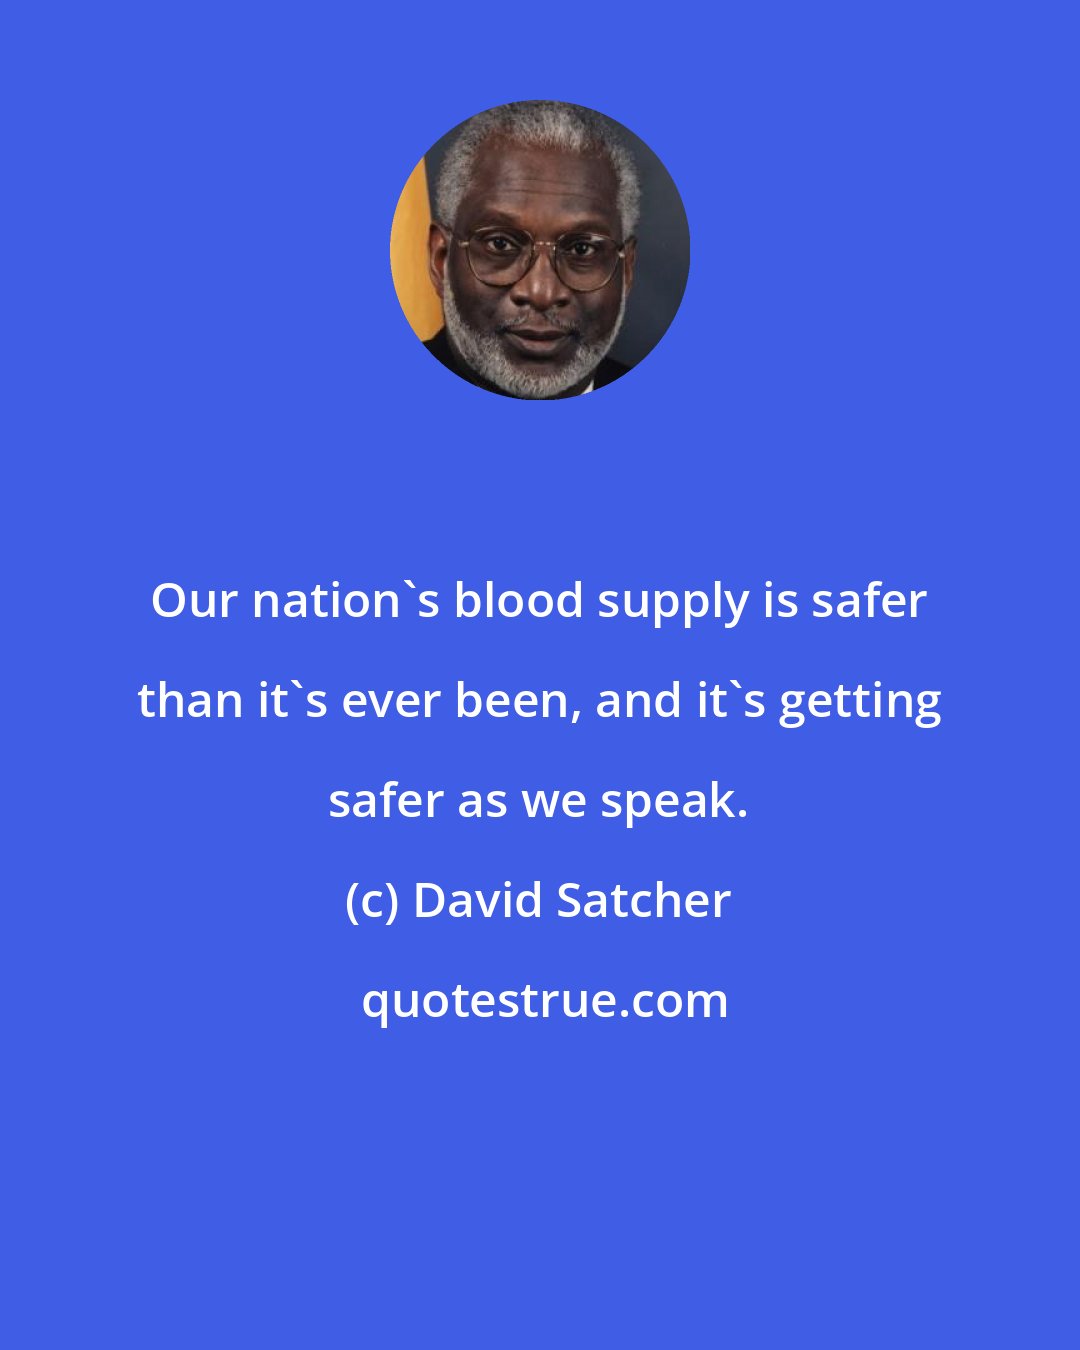 David Satcher: Our nation's blood supply is safer than it's ever been, and it's getting safer as we speak.